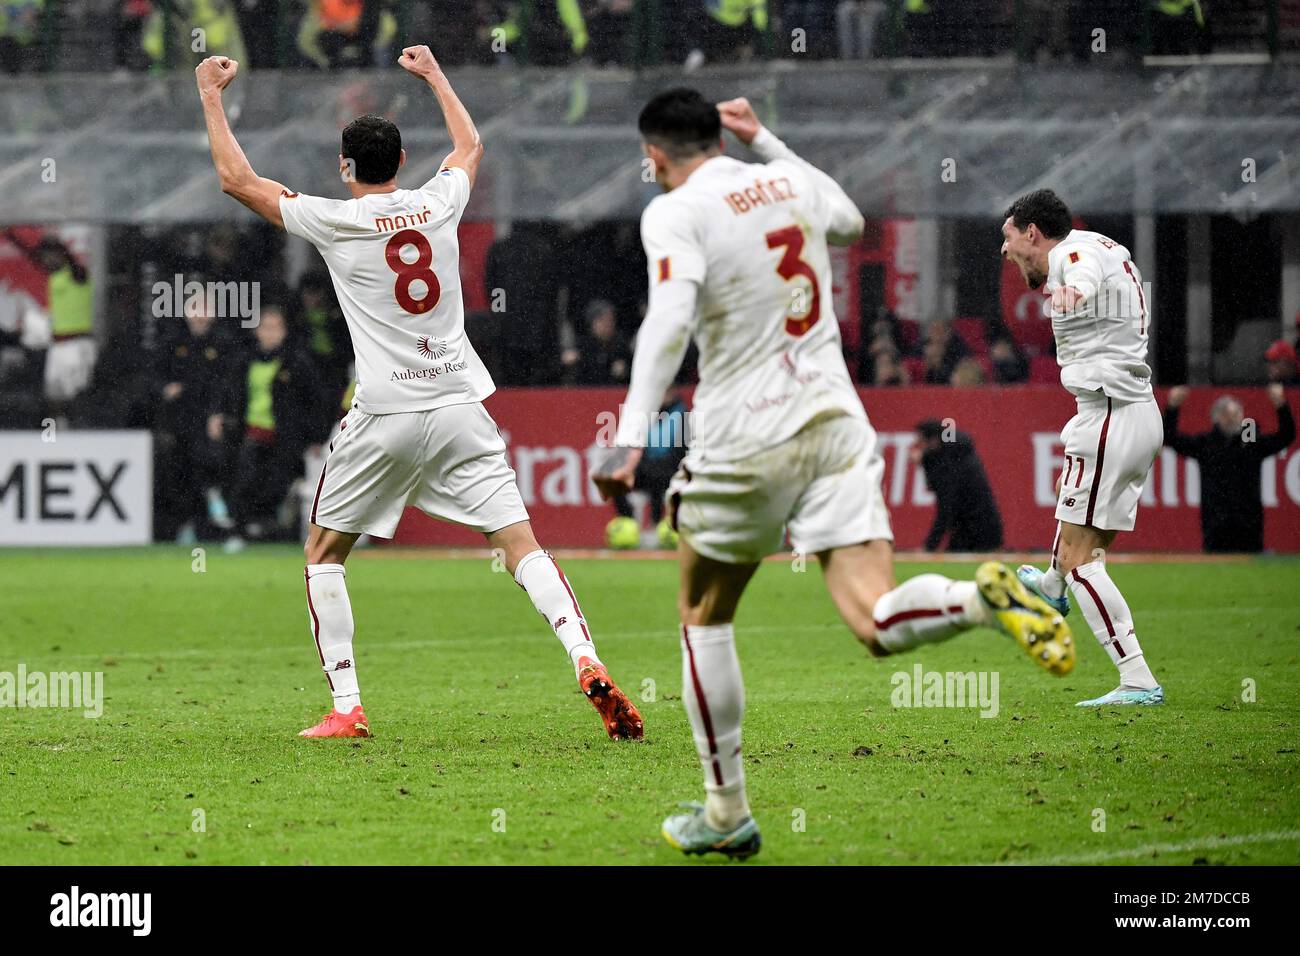 Nemanja Matic, Roger Ibanez and Andrea Belotti of AS Roma celebrate after Tammy Abraham (not pictured), scored the goal of 2-2 during the Serie A foot Stock Photo